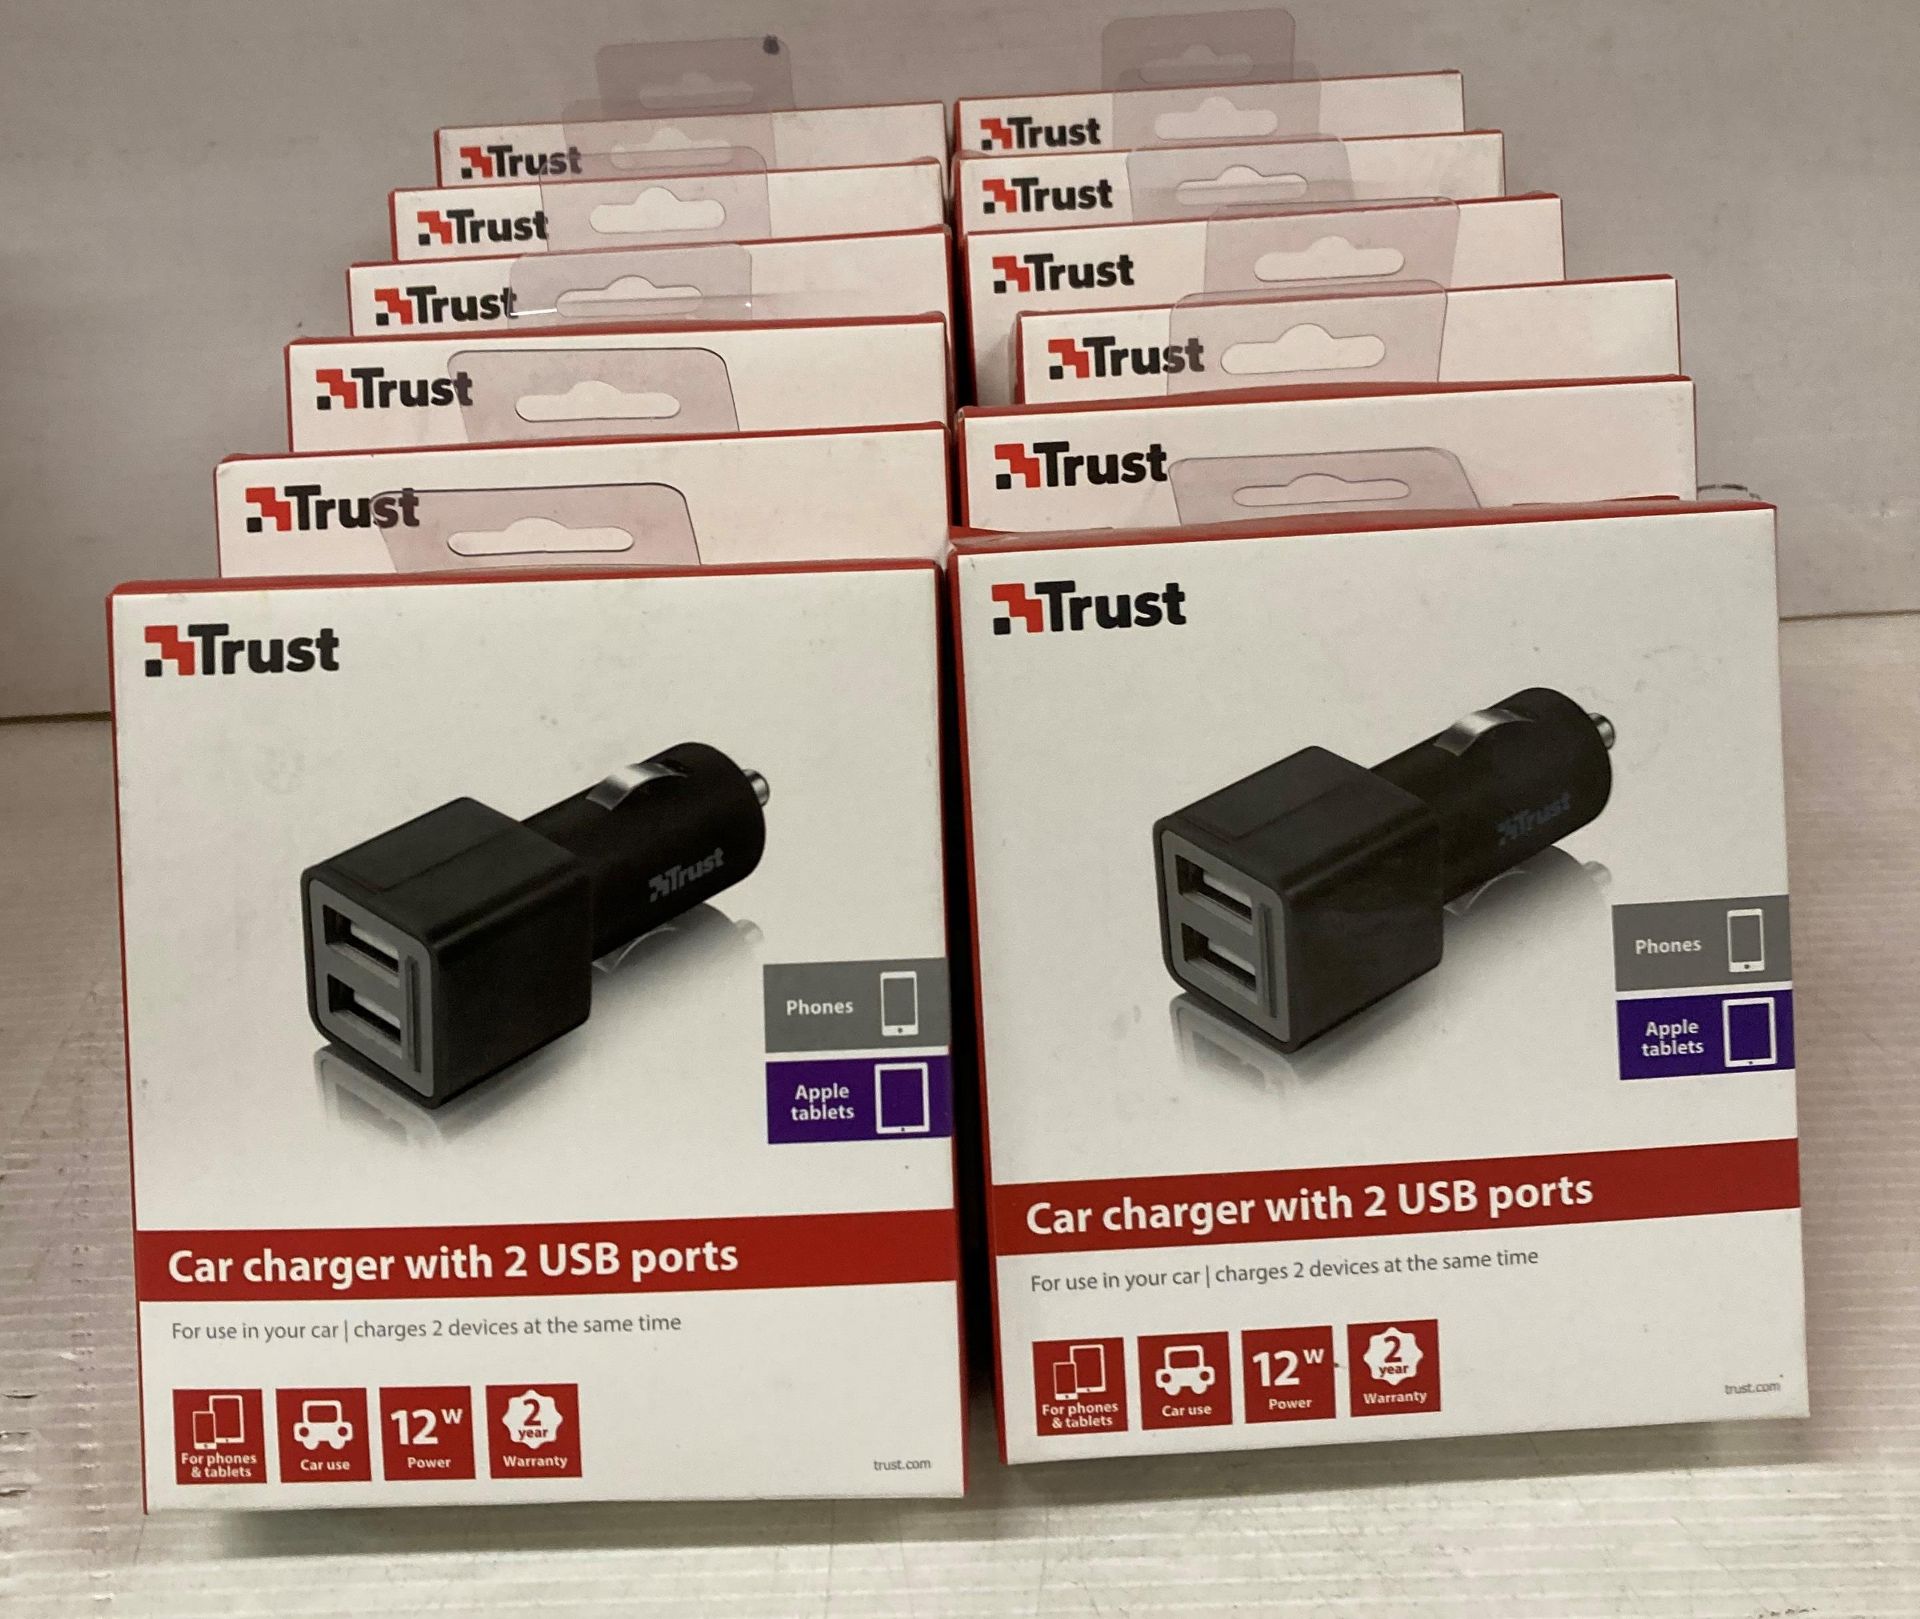 12 x Trust port USB in car chargers (E07) Further Information DISCLAIMER - THE